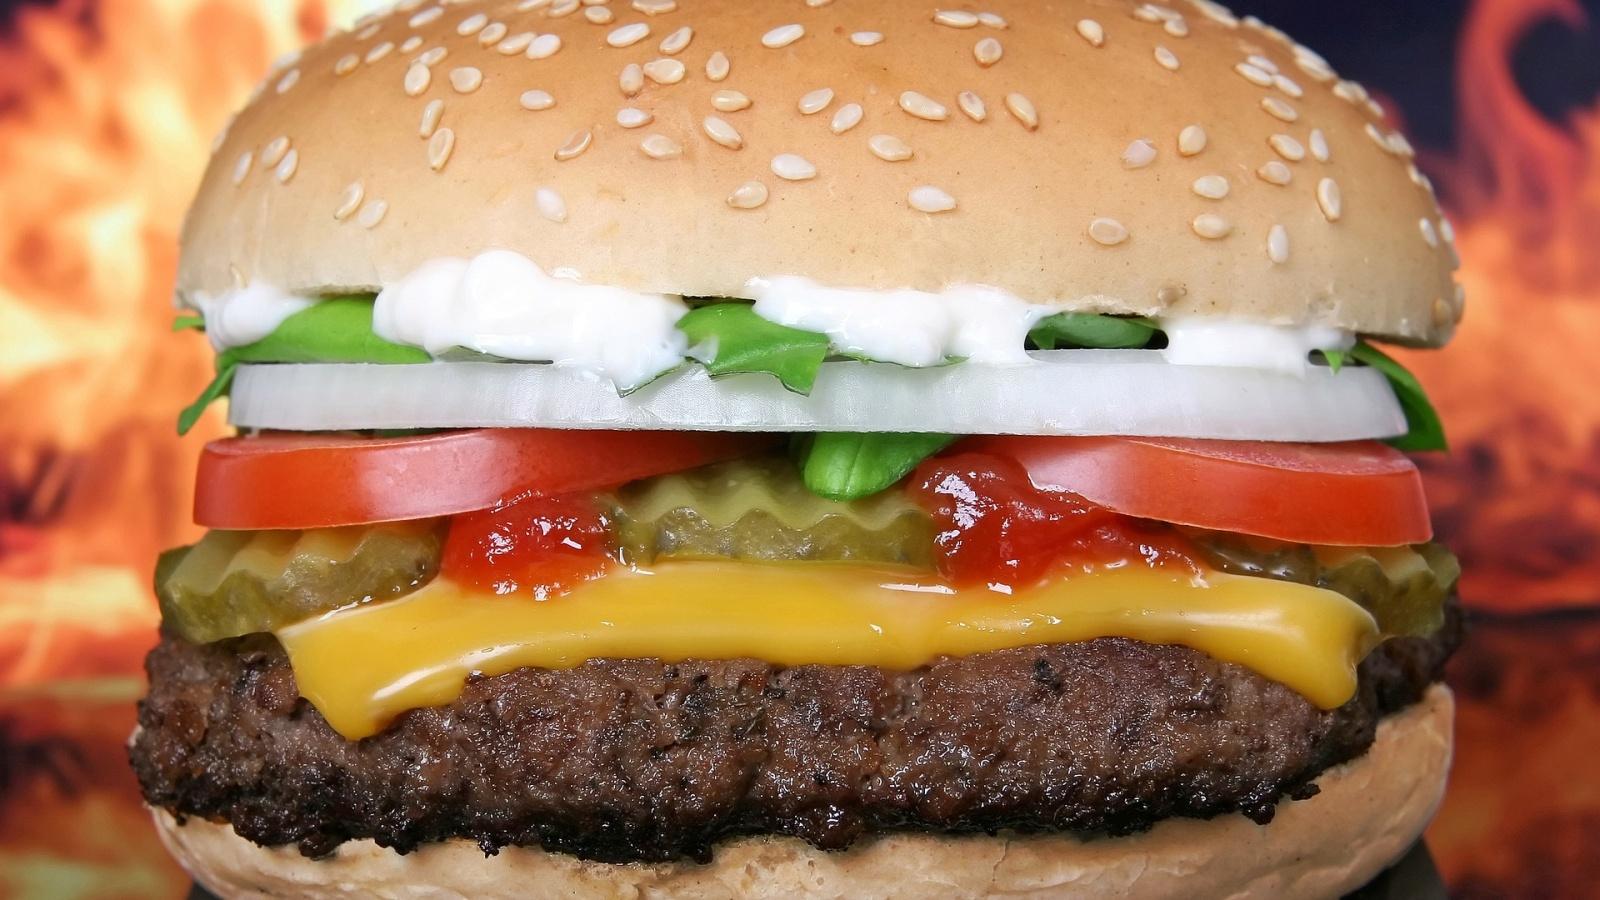 a juicy hamburger stacked with tomato, cheese and pickles in front of a flaming background